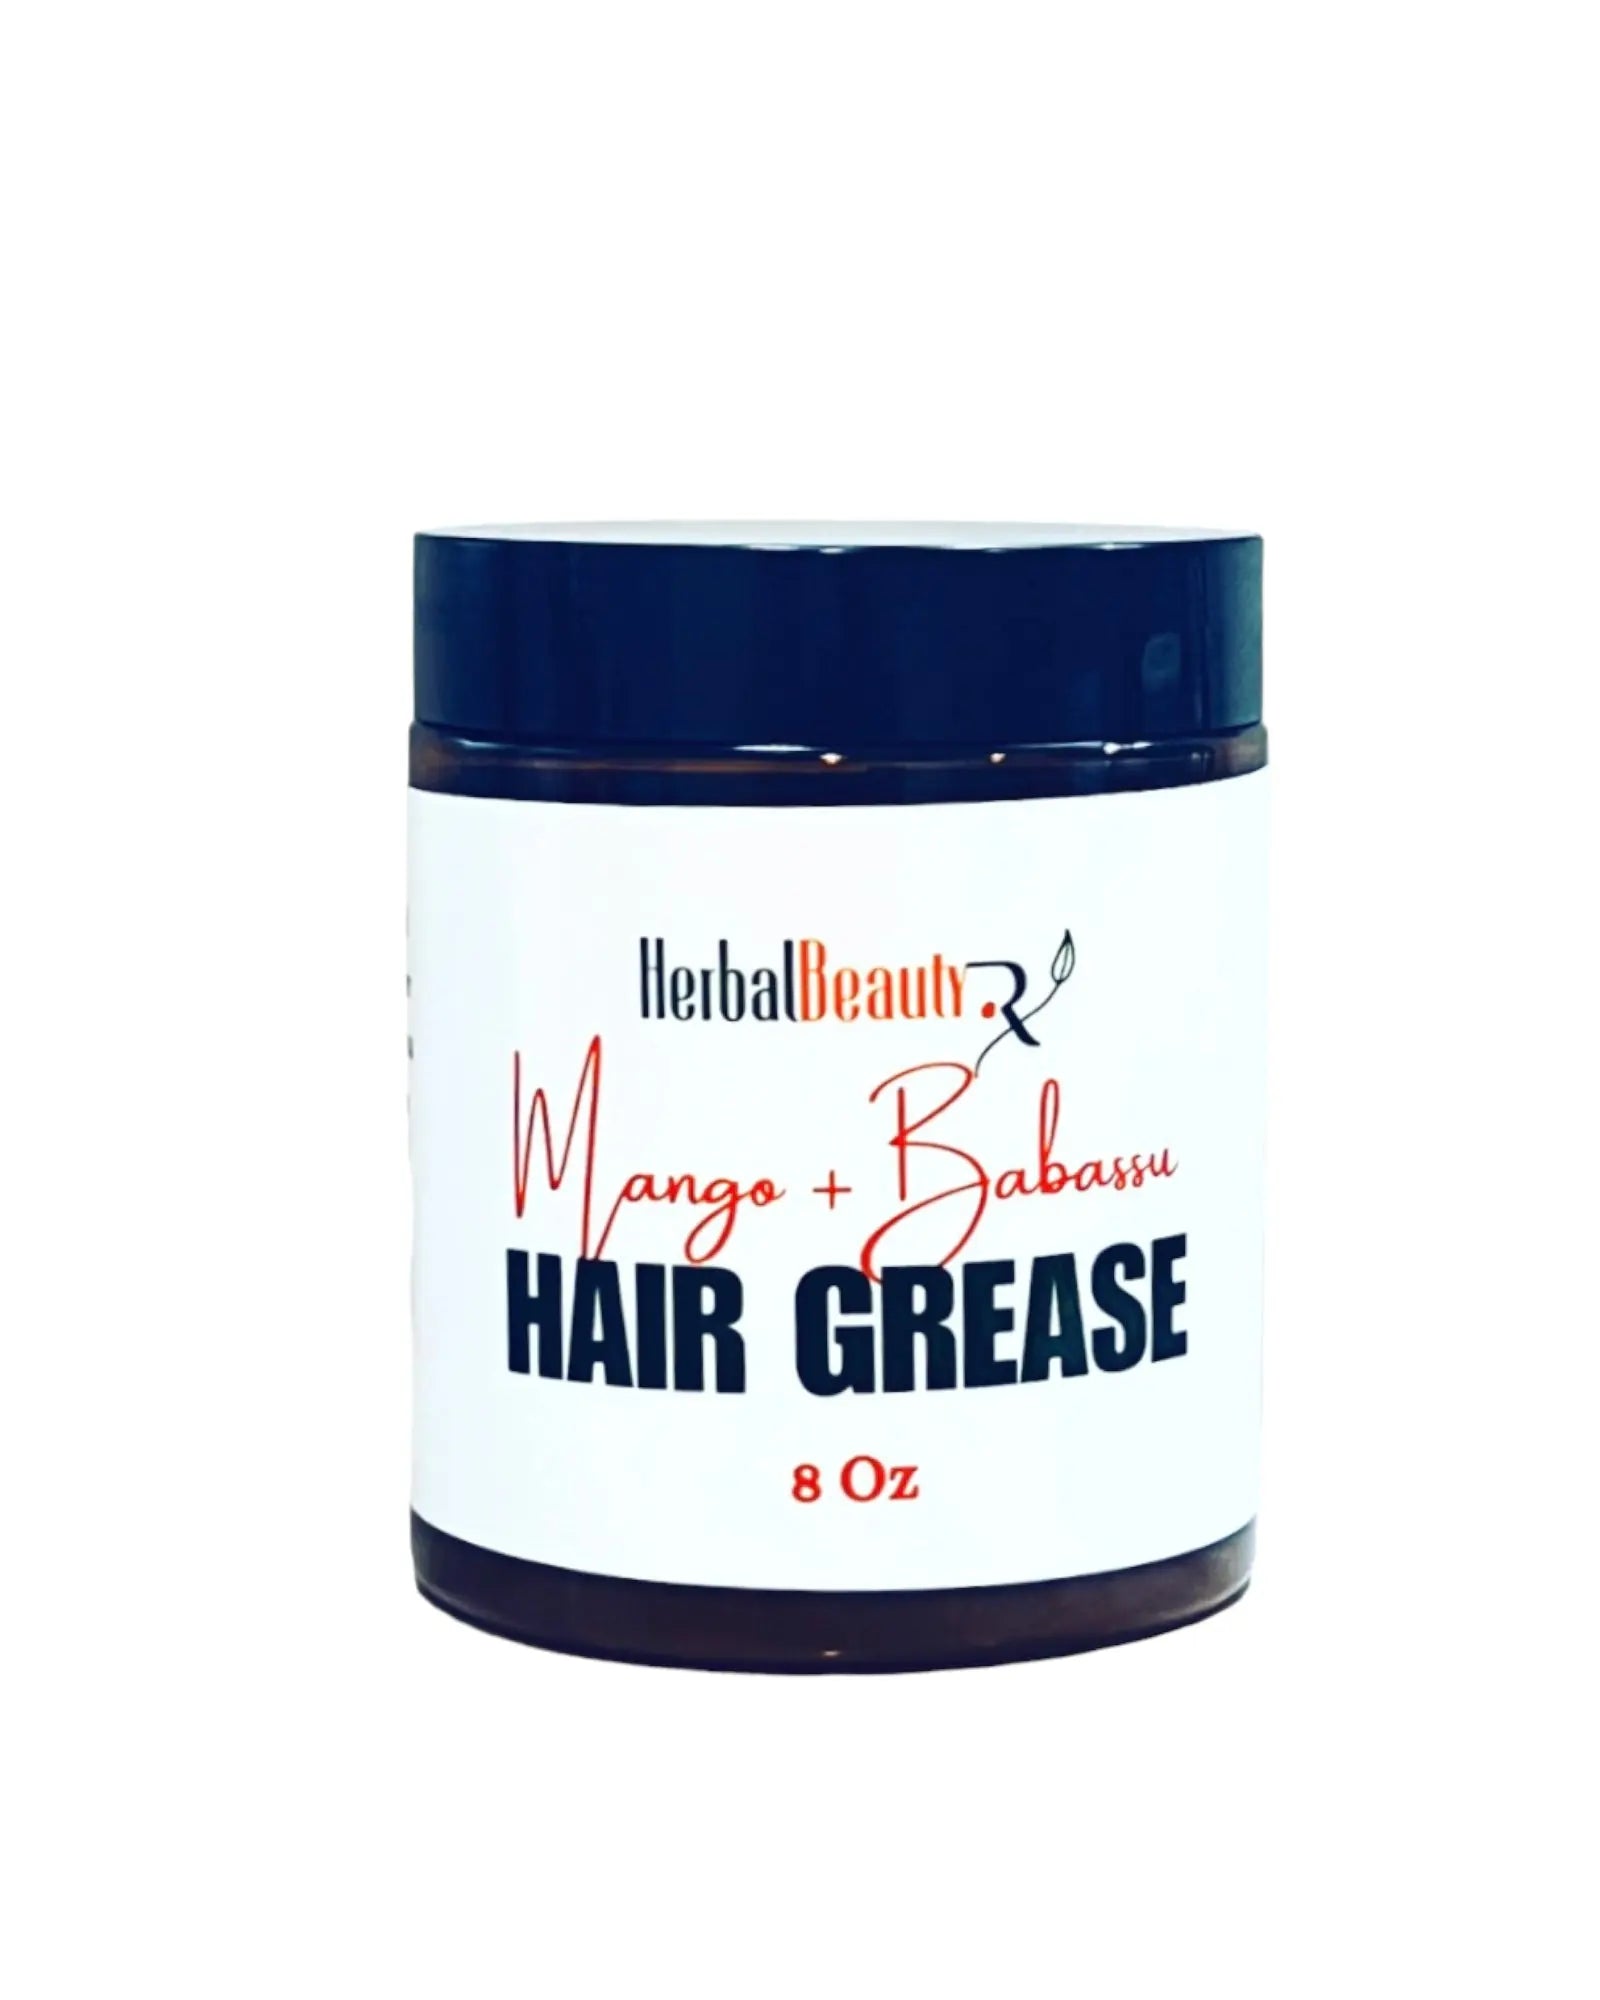 Hair grease, Moisturizes and Adds Shine, Prevents breakage